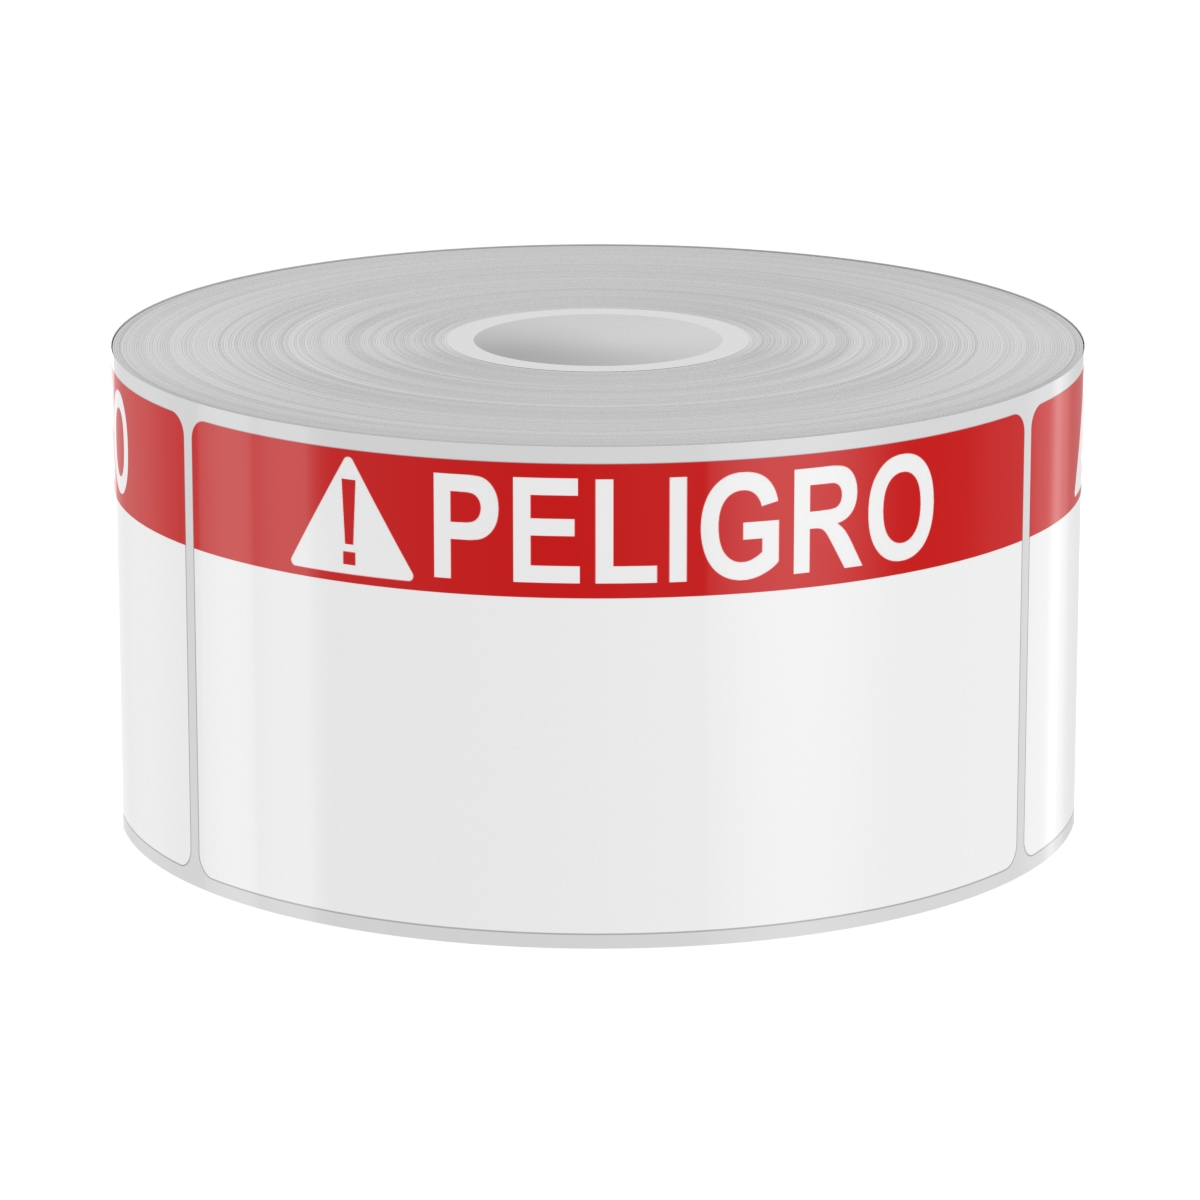 Detail view for 250 2" x 4" Labels with Red PELIGRO Header